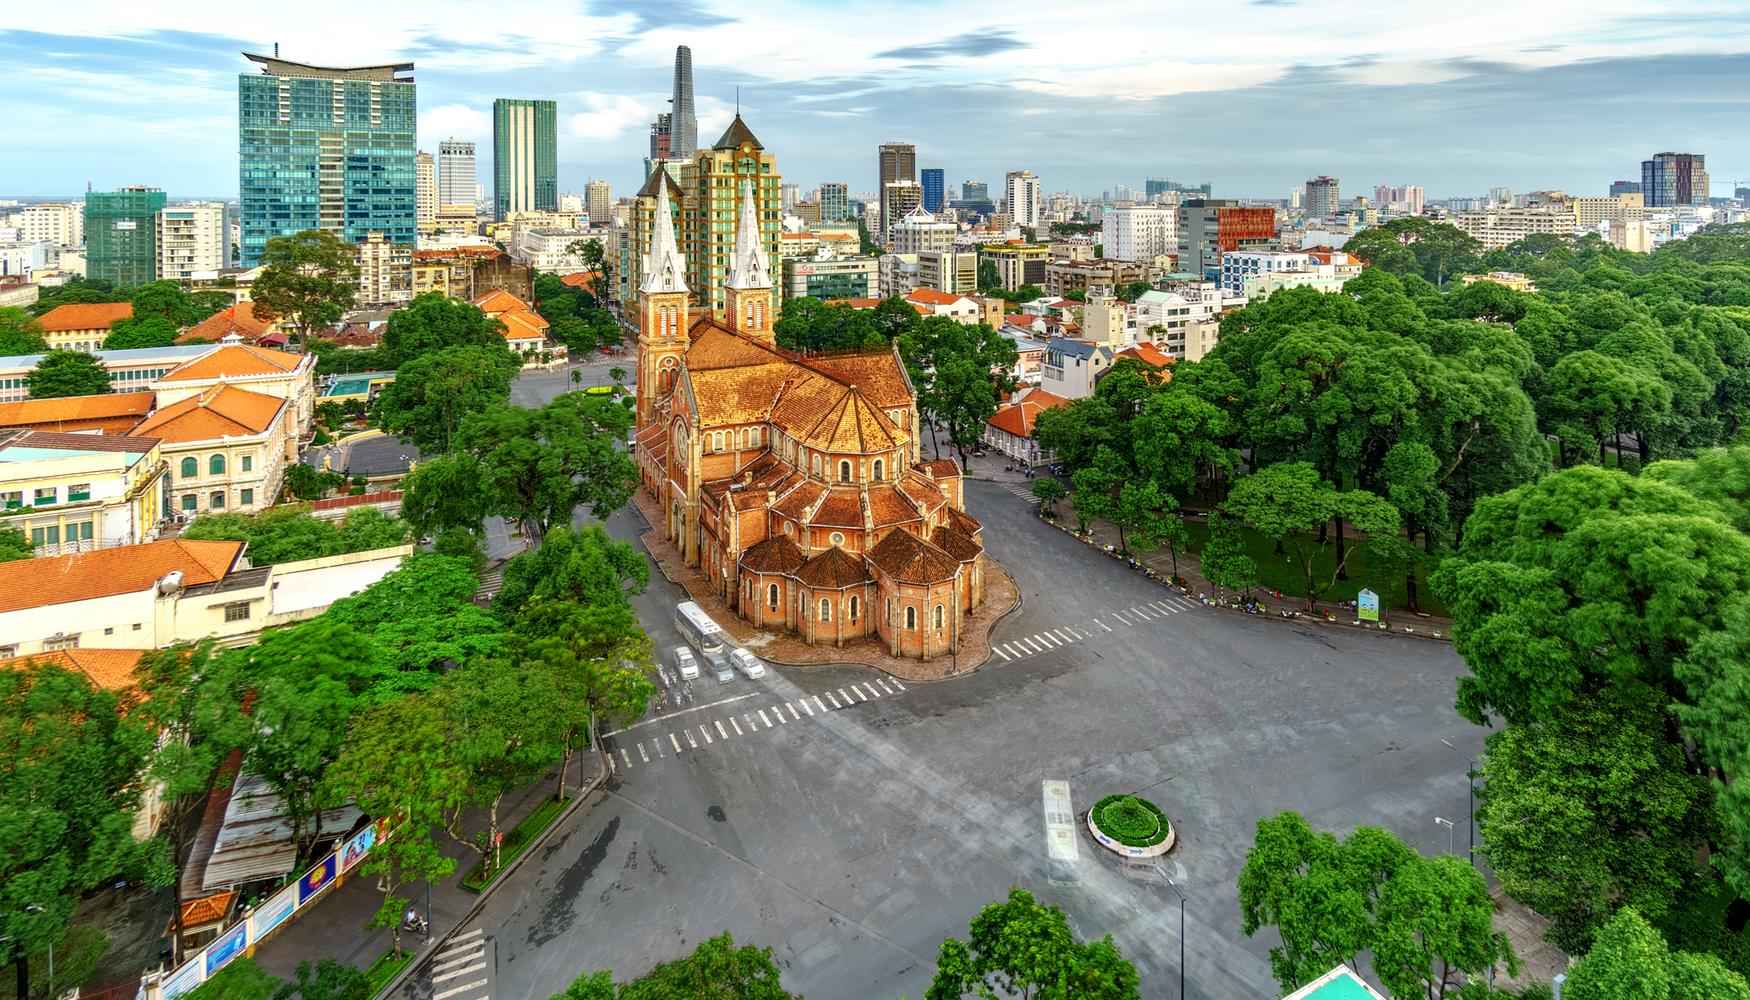 Ho Chi Minh Travel Guide The Best Travel Guide To Ho Chi Minh City Updated 2020 Heres 